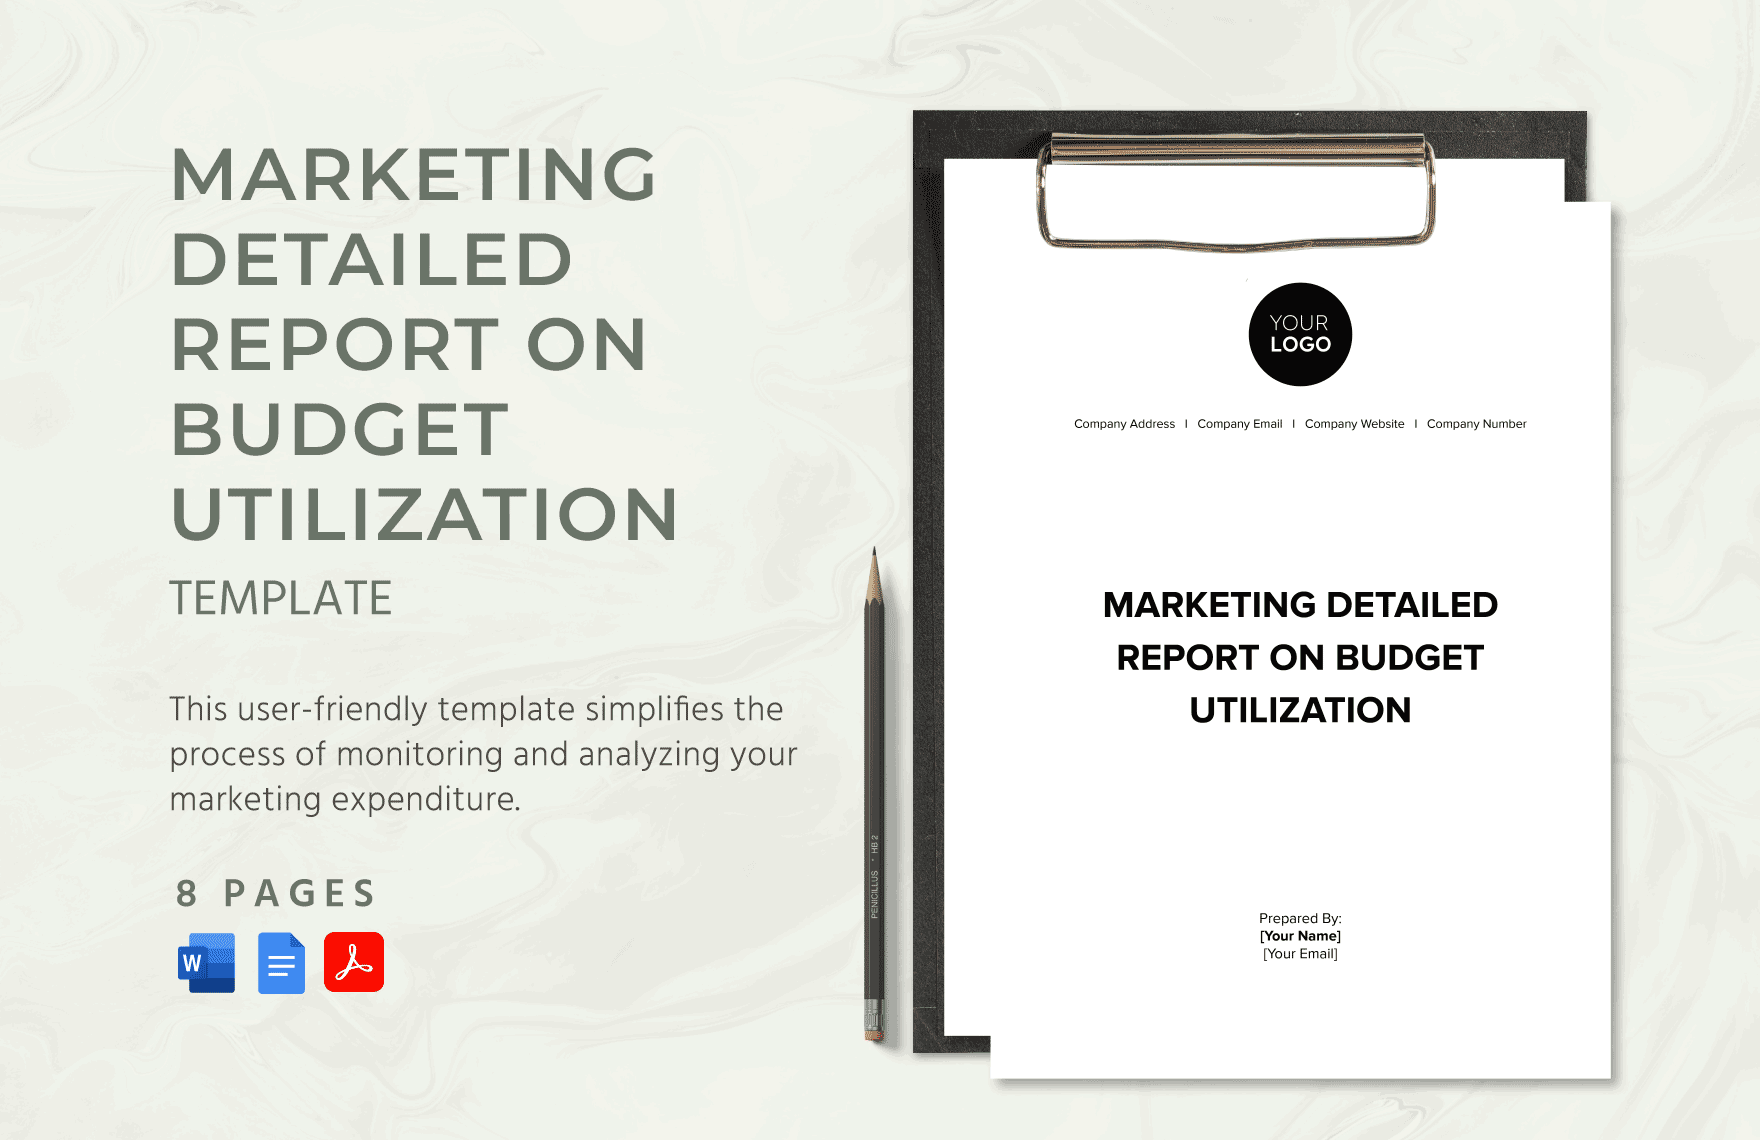 Marketing Detailed Report on Budget Utilization Template